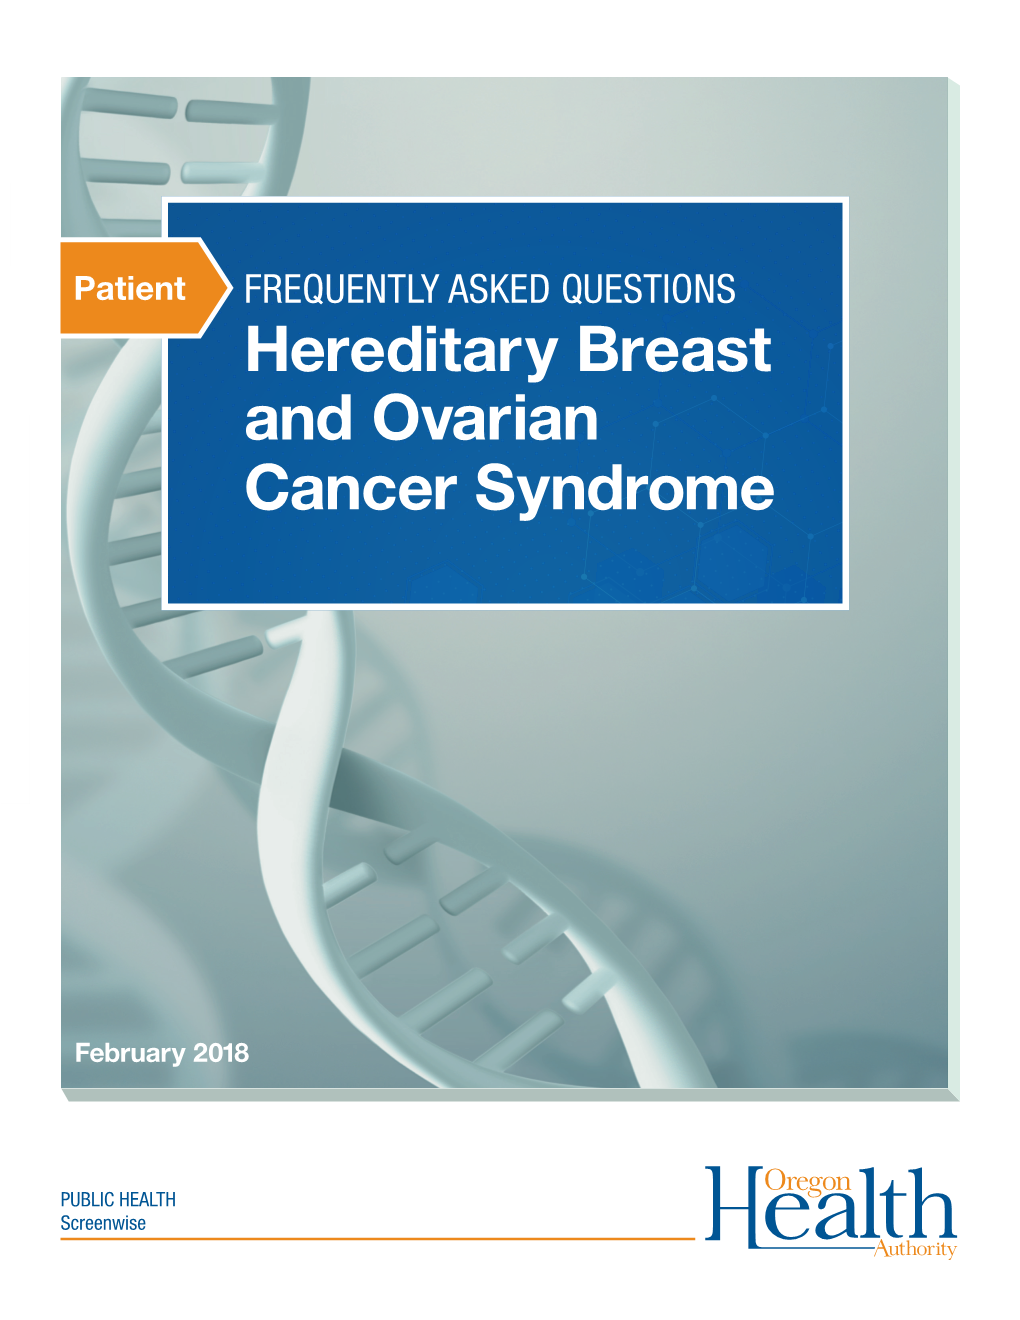 FAQ: Hereditary Breast and Ovarian Cancer Syndrome (HBOC)